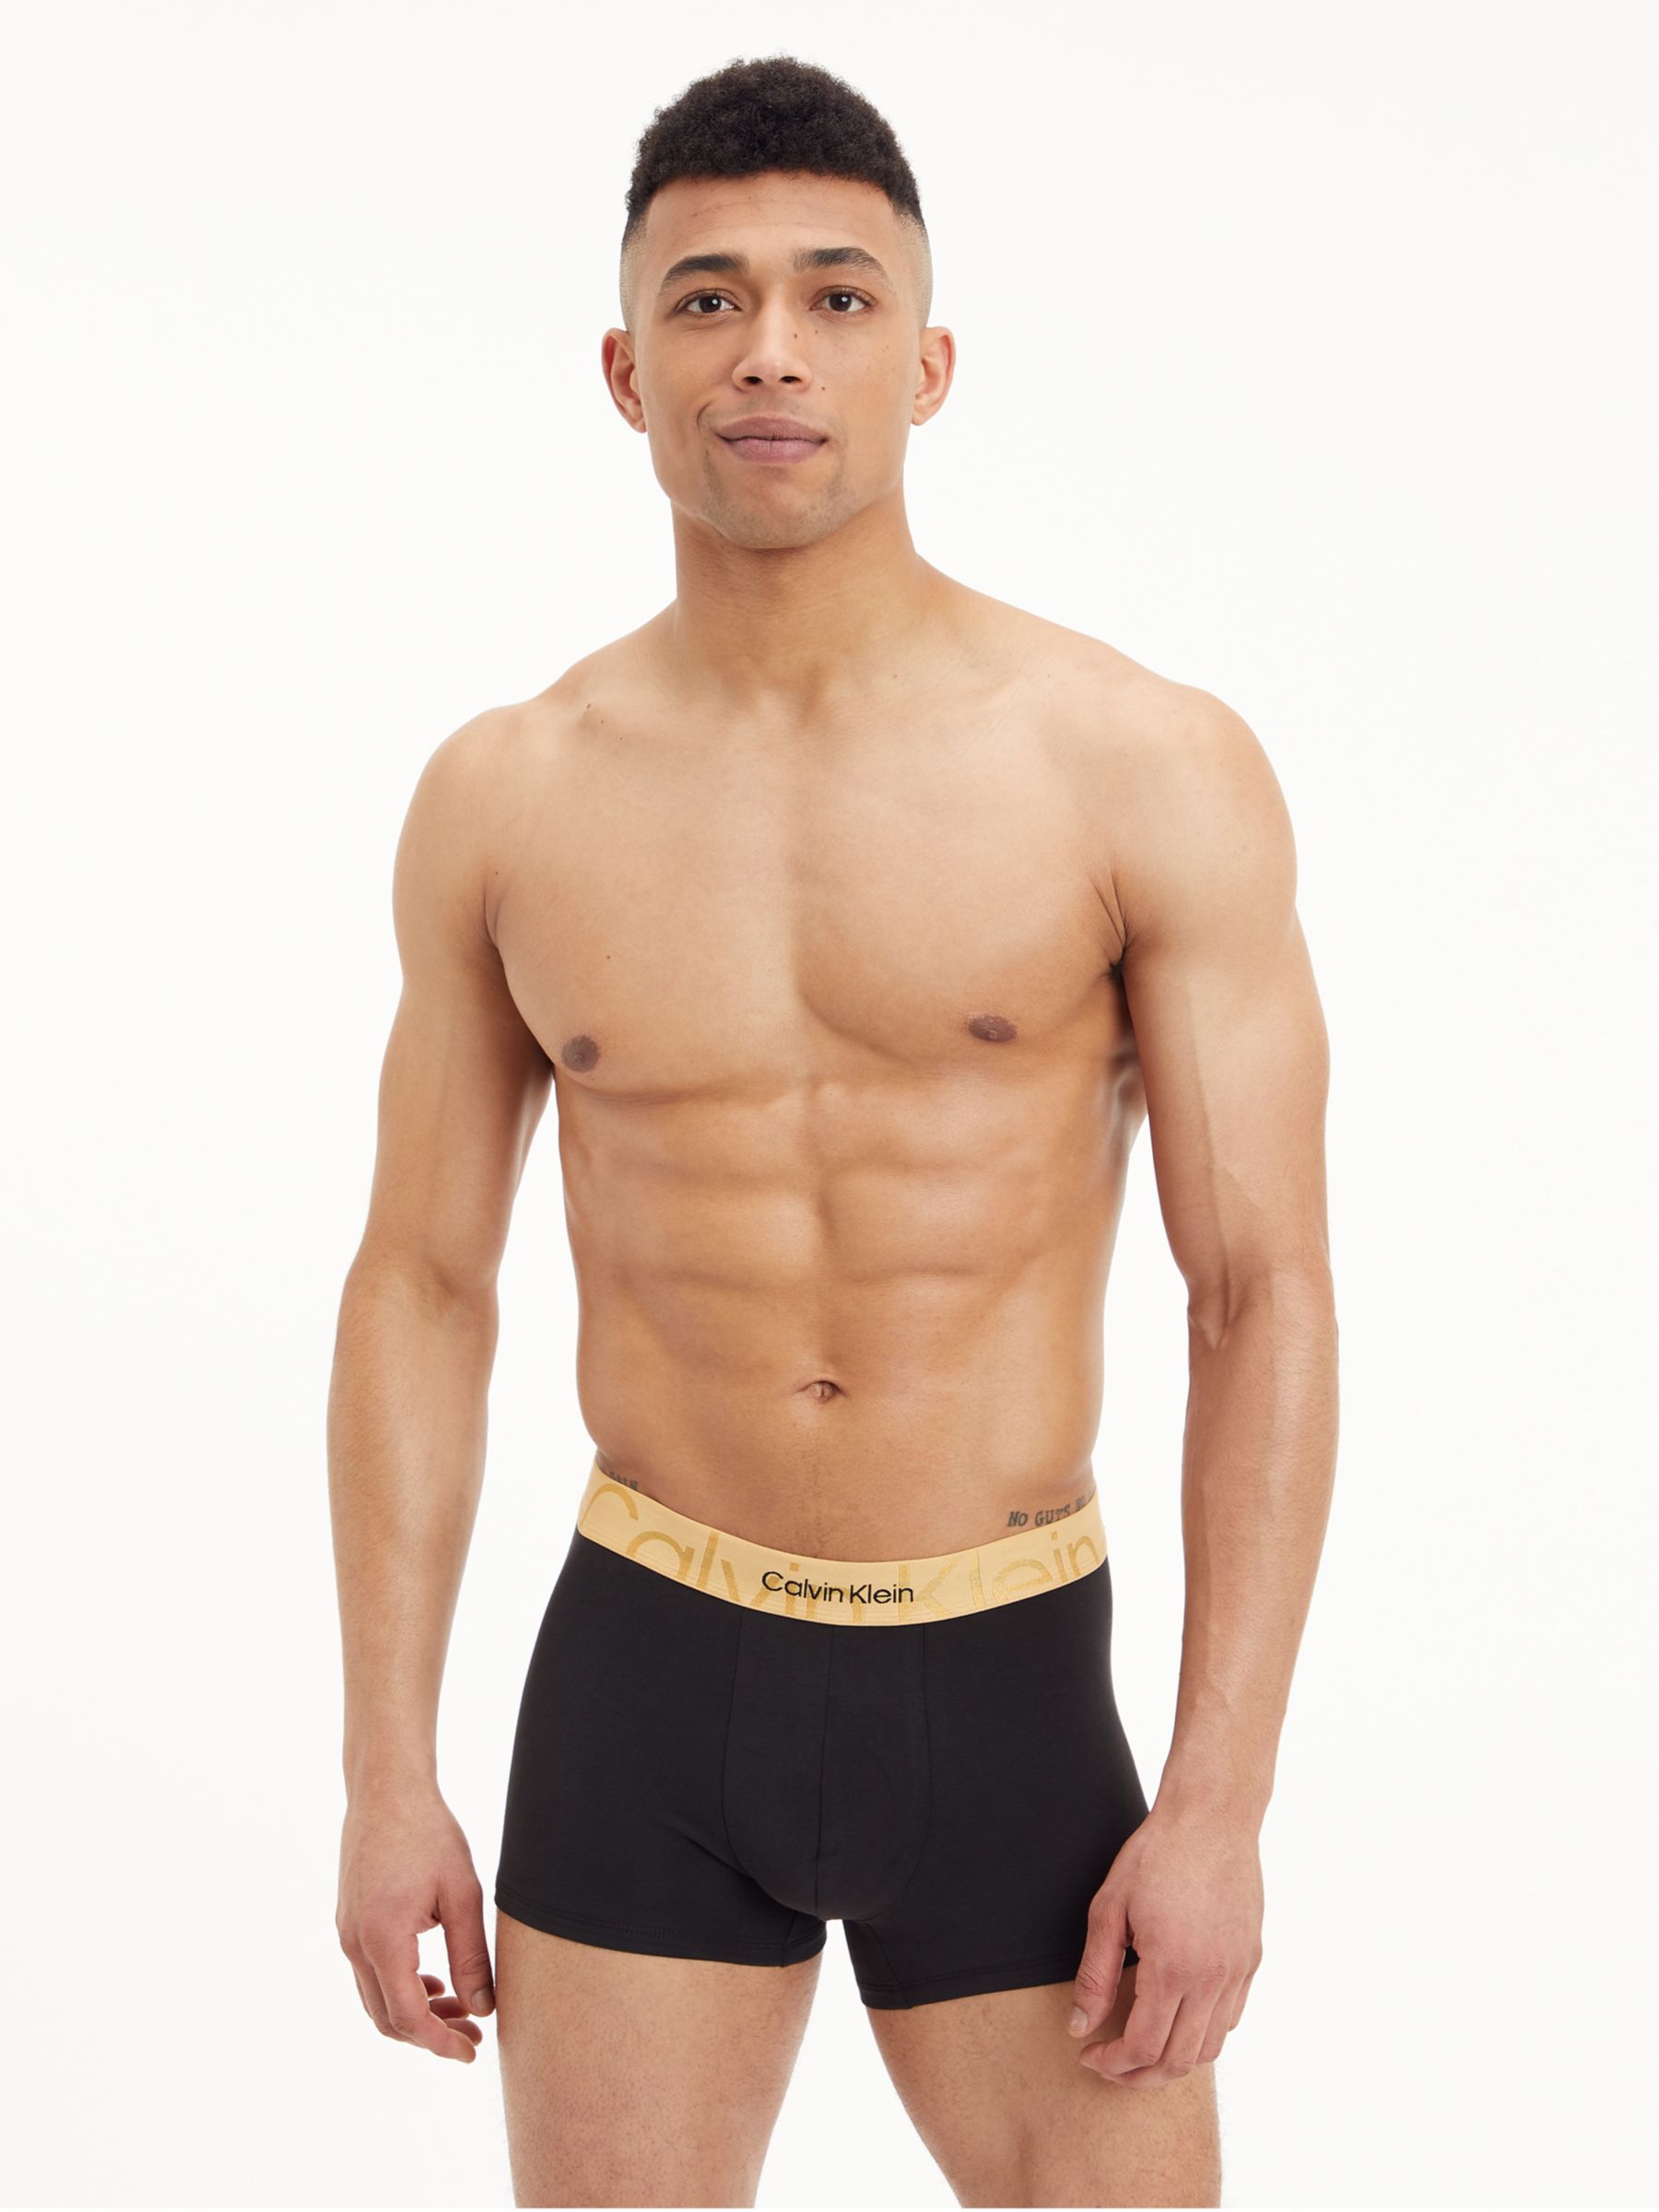 Calvin Klein Embossed Icon Cotton Stretch Trunks, Black/Gold, S